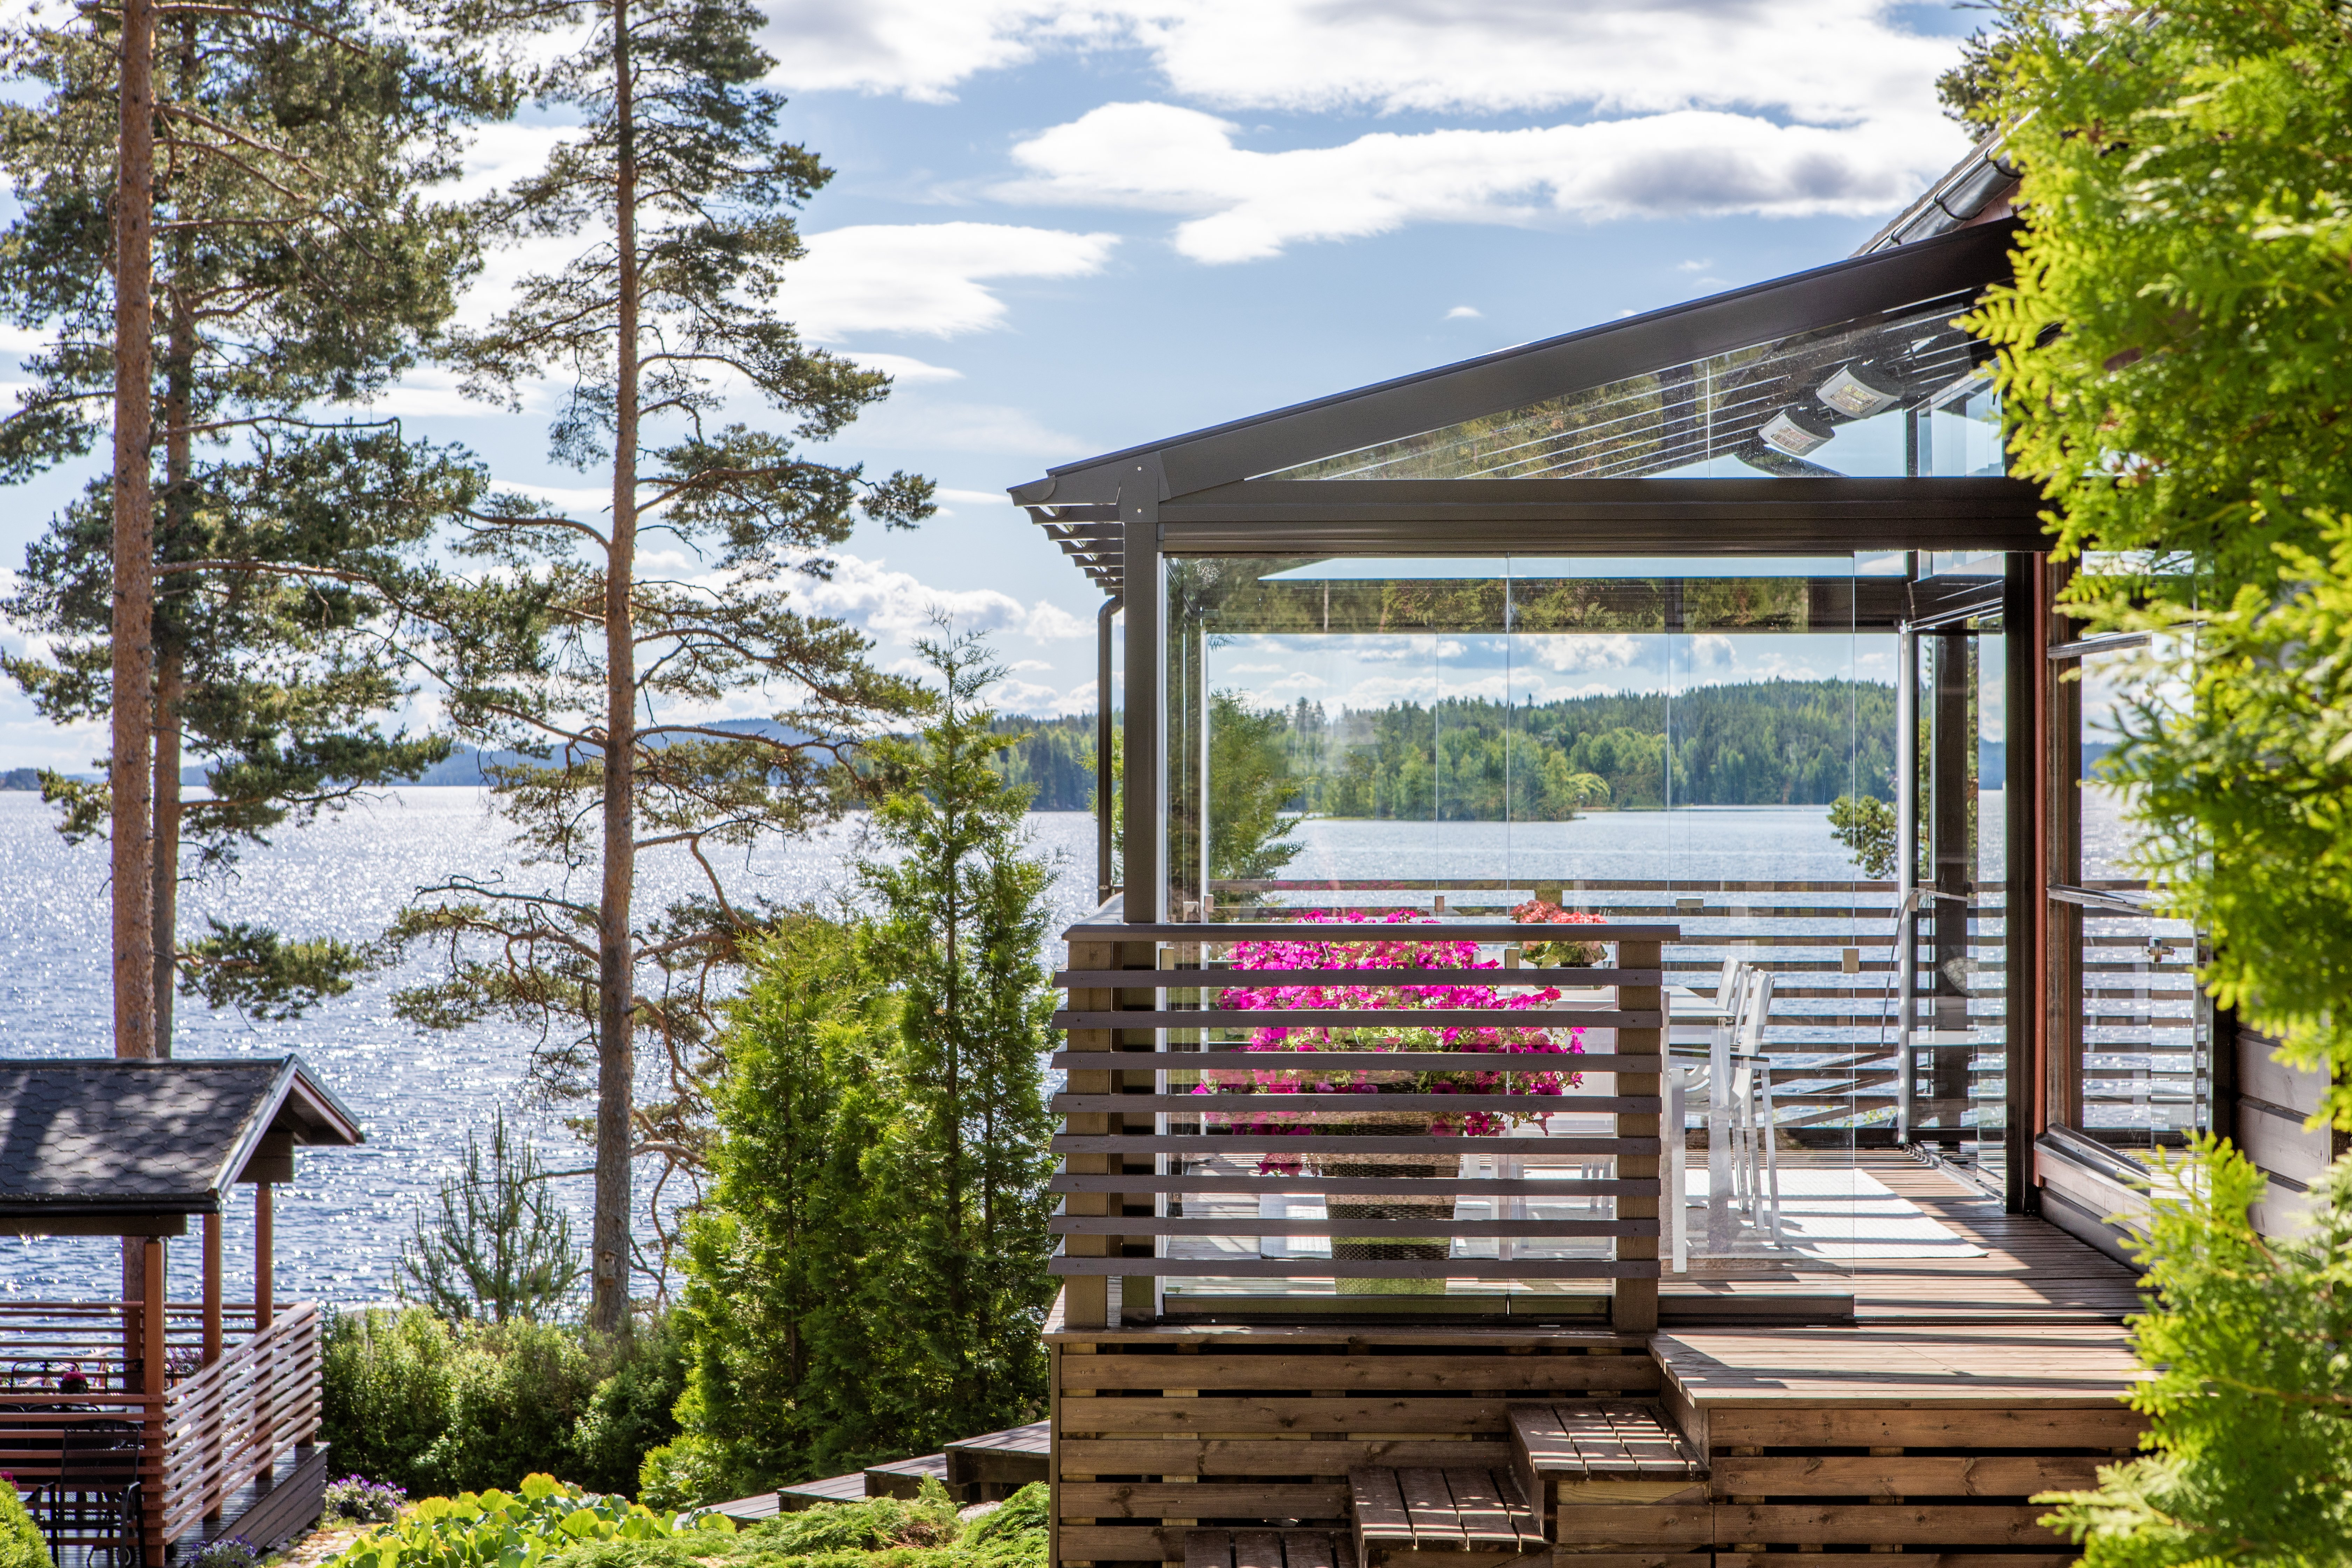 Sunroom by the lake in summertime in Finland